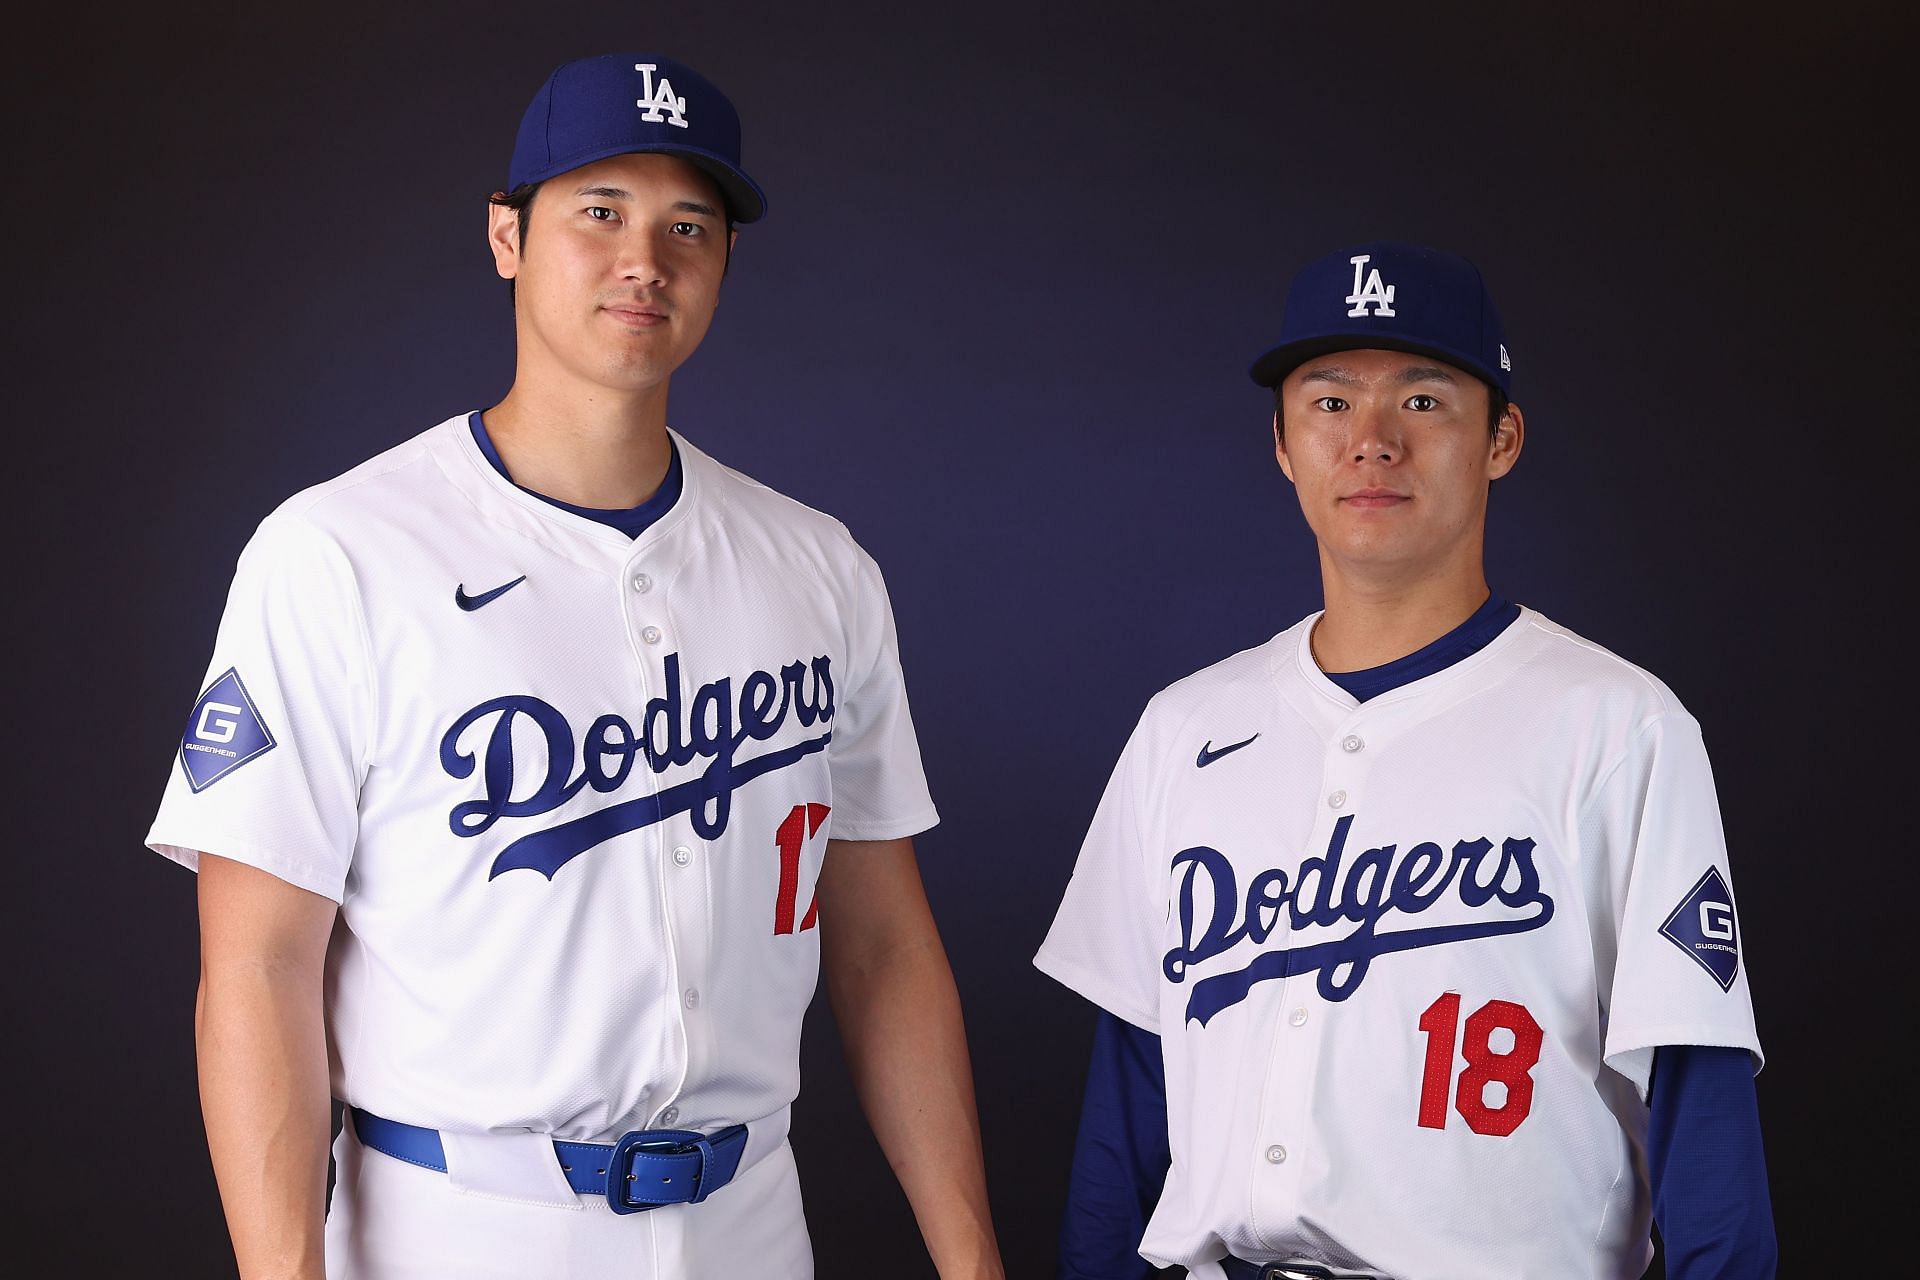 Dodgers vs Padres Spring Training Opener is today